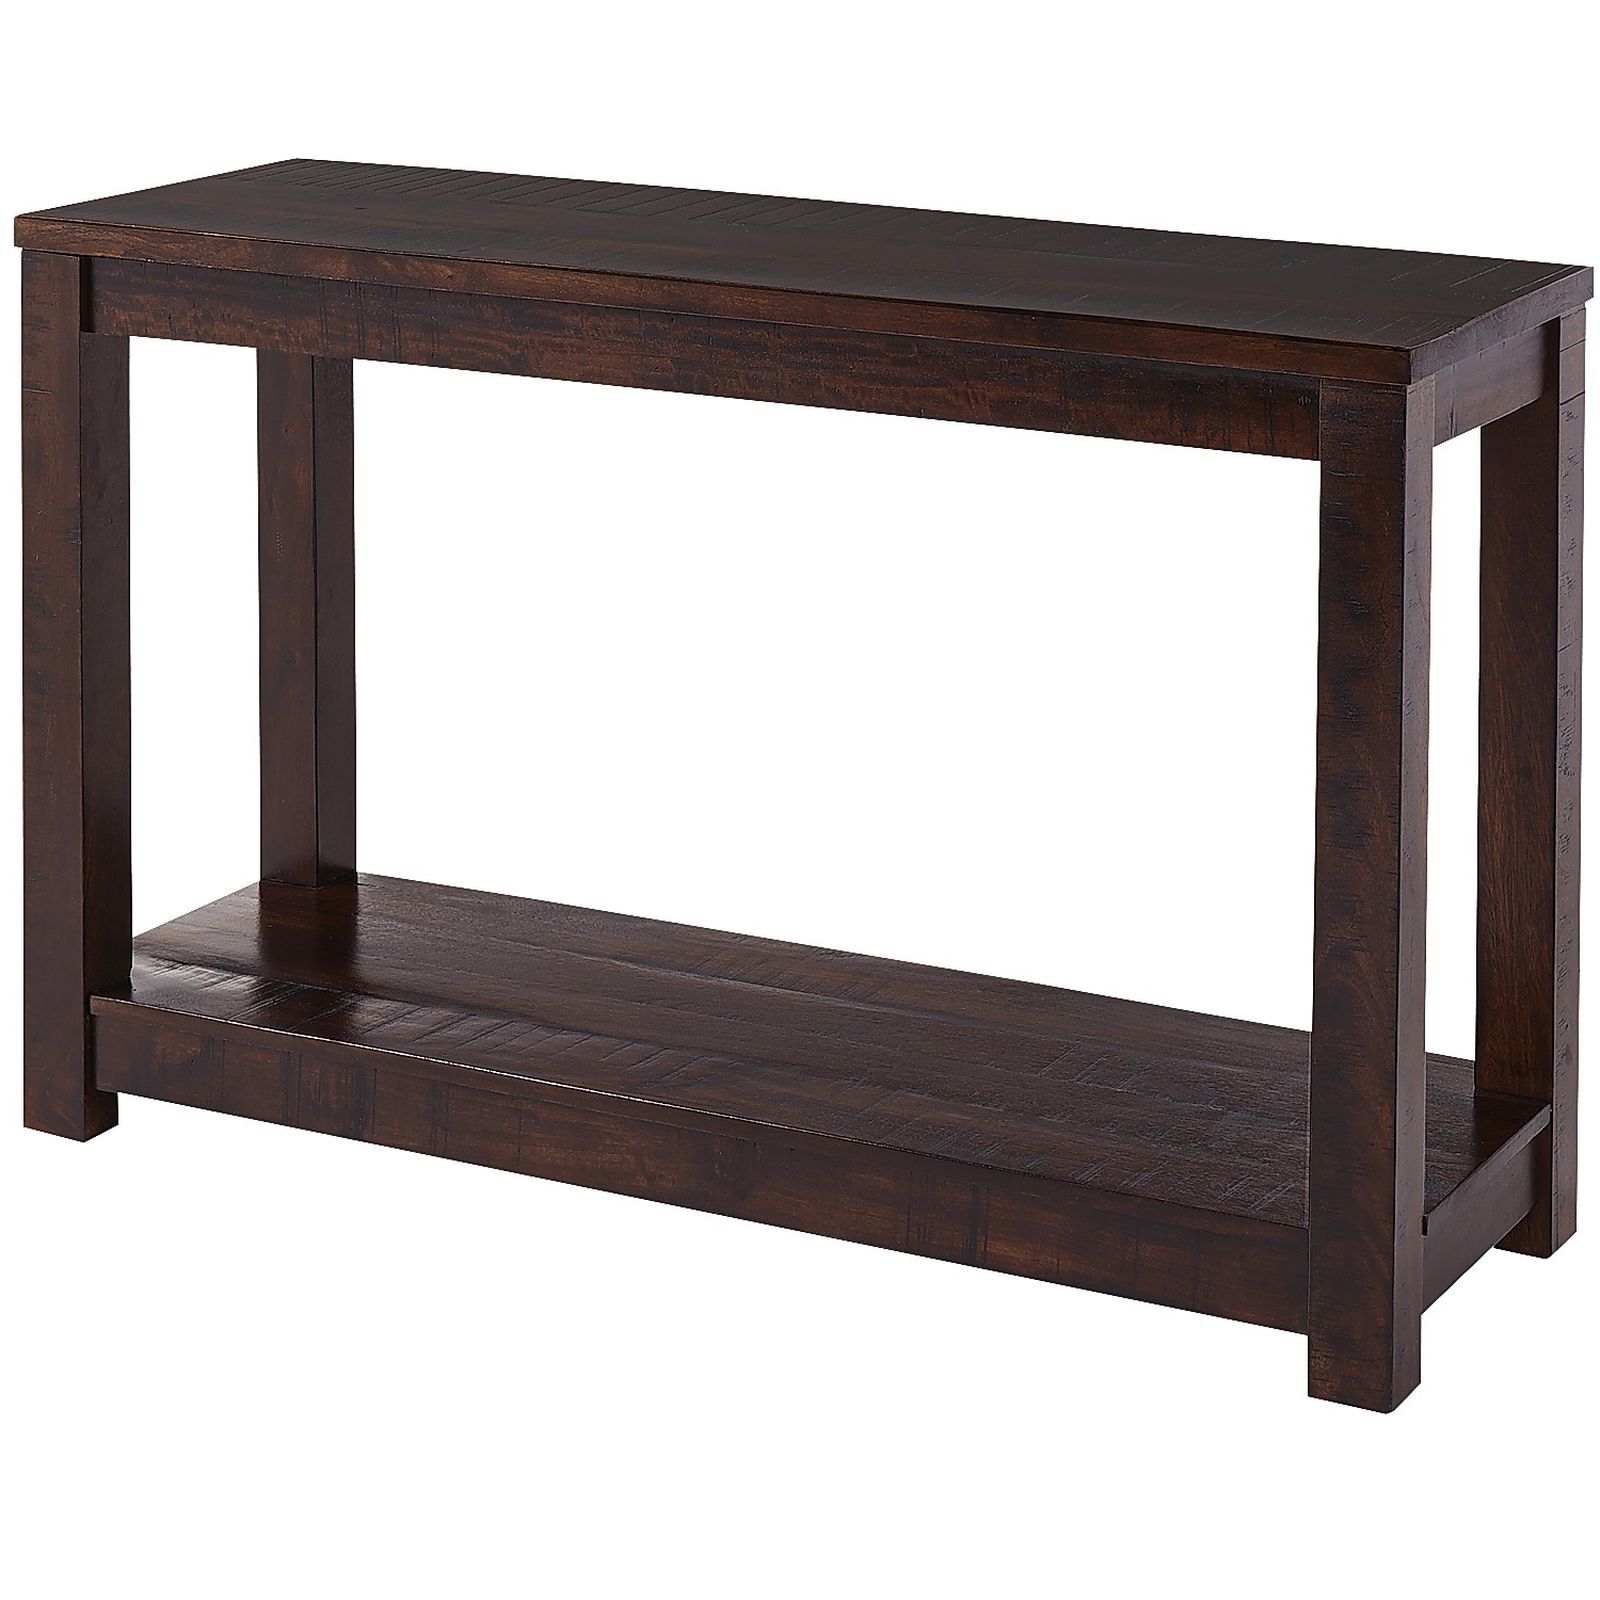 Parsons Console Table Wish Tobacco Brown Pier 1 Imports Regarding 16 Inside Intarsia Console Tables (View 9 of 20)